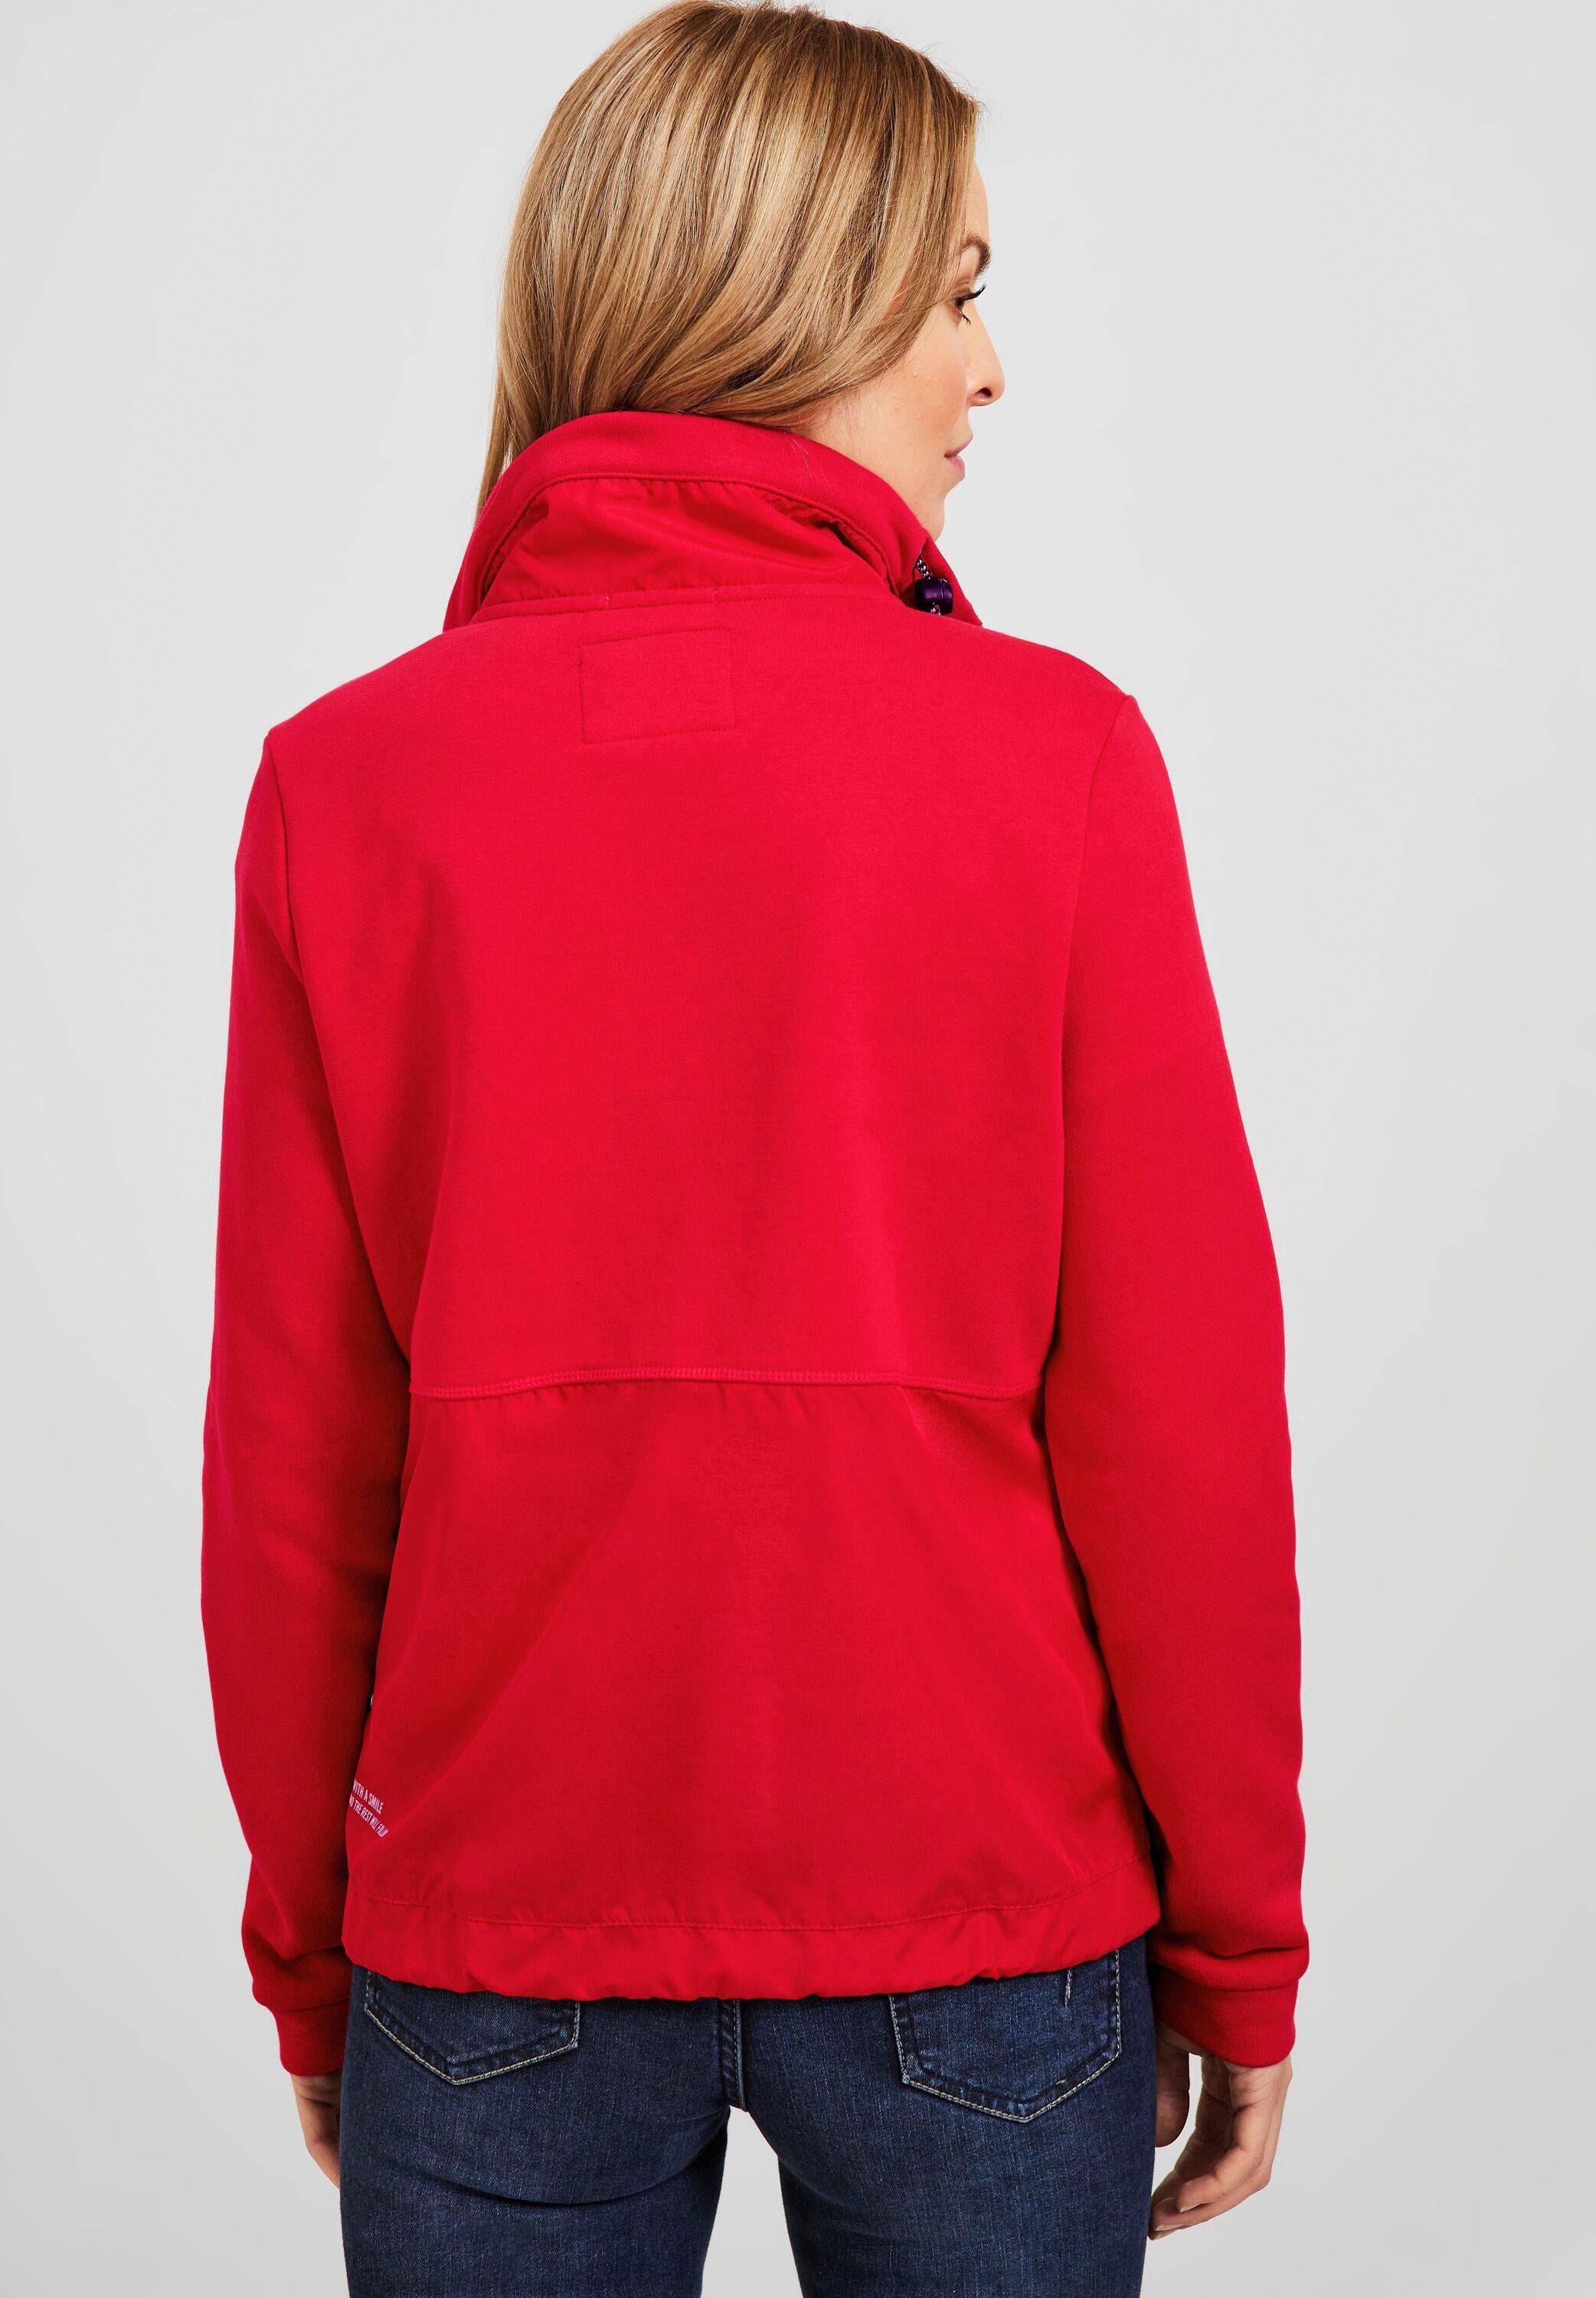 red modernen strong Cecil Materialmix im Sweatjacke